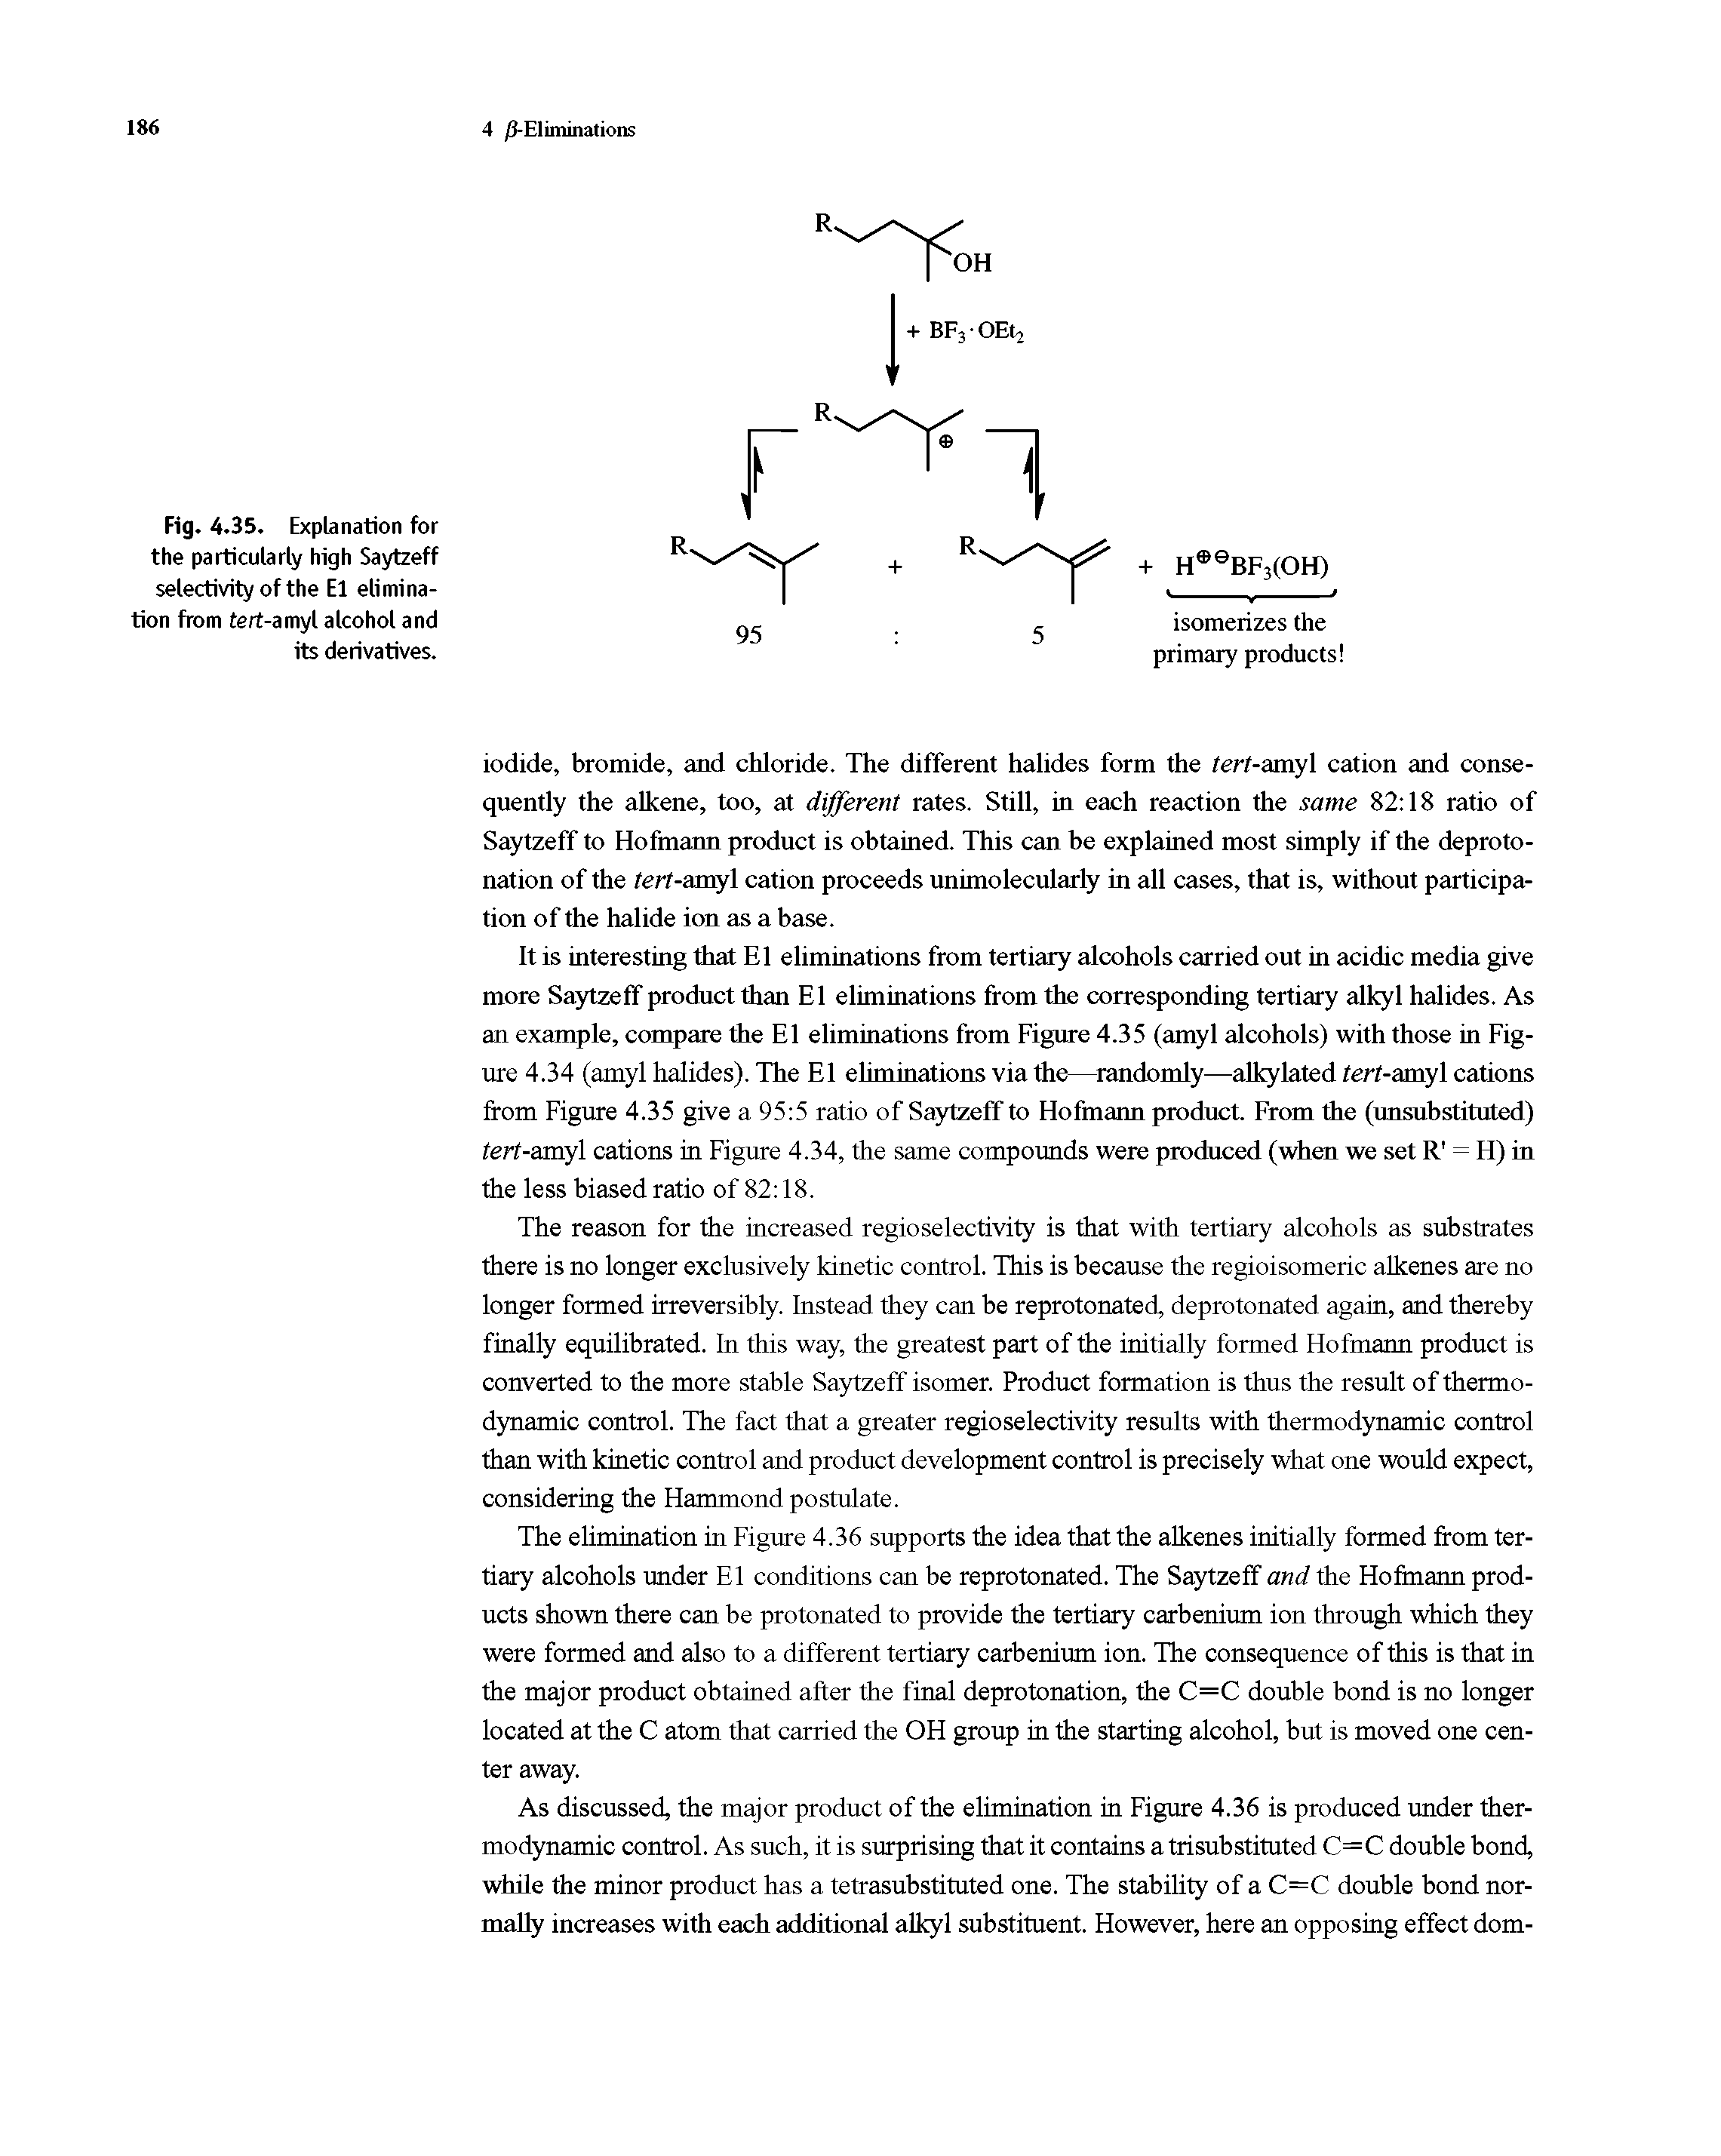 Fig. 4. 35. Explanation for the particularly high Saytzeff selectivity of the El elimination from tert-amyl alcohol and its derivatives.